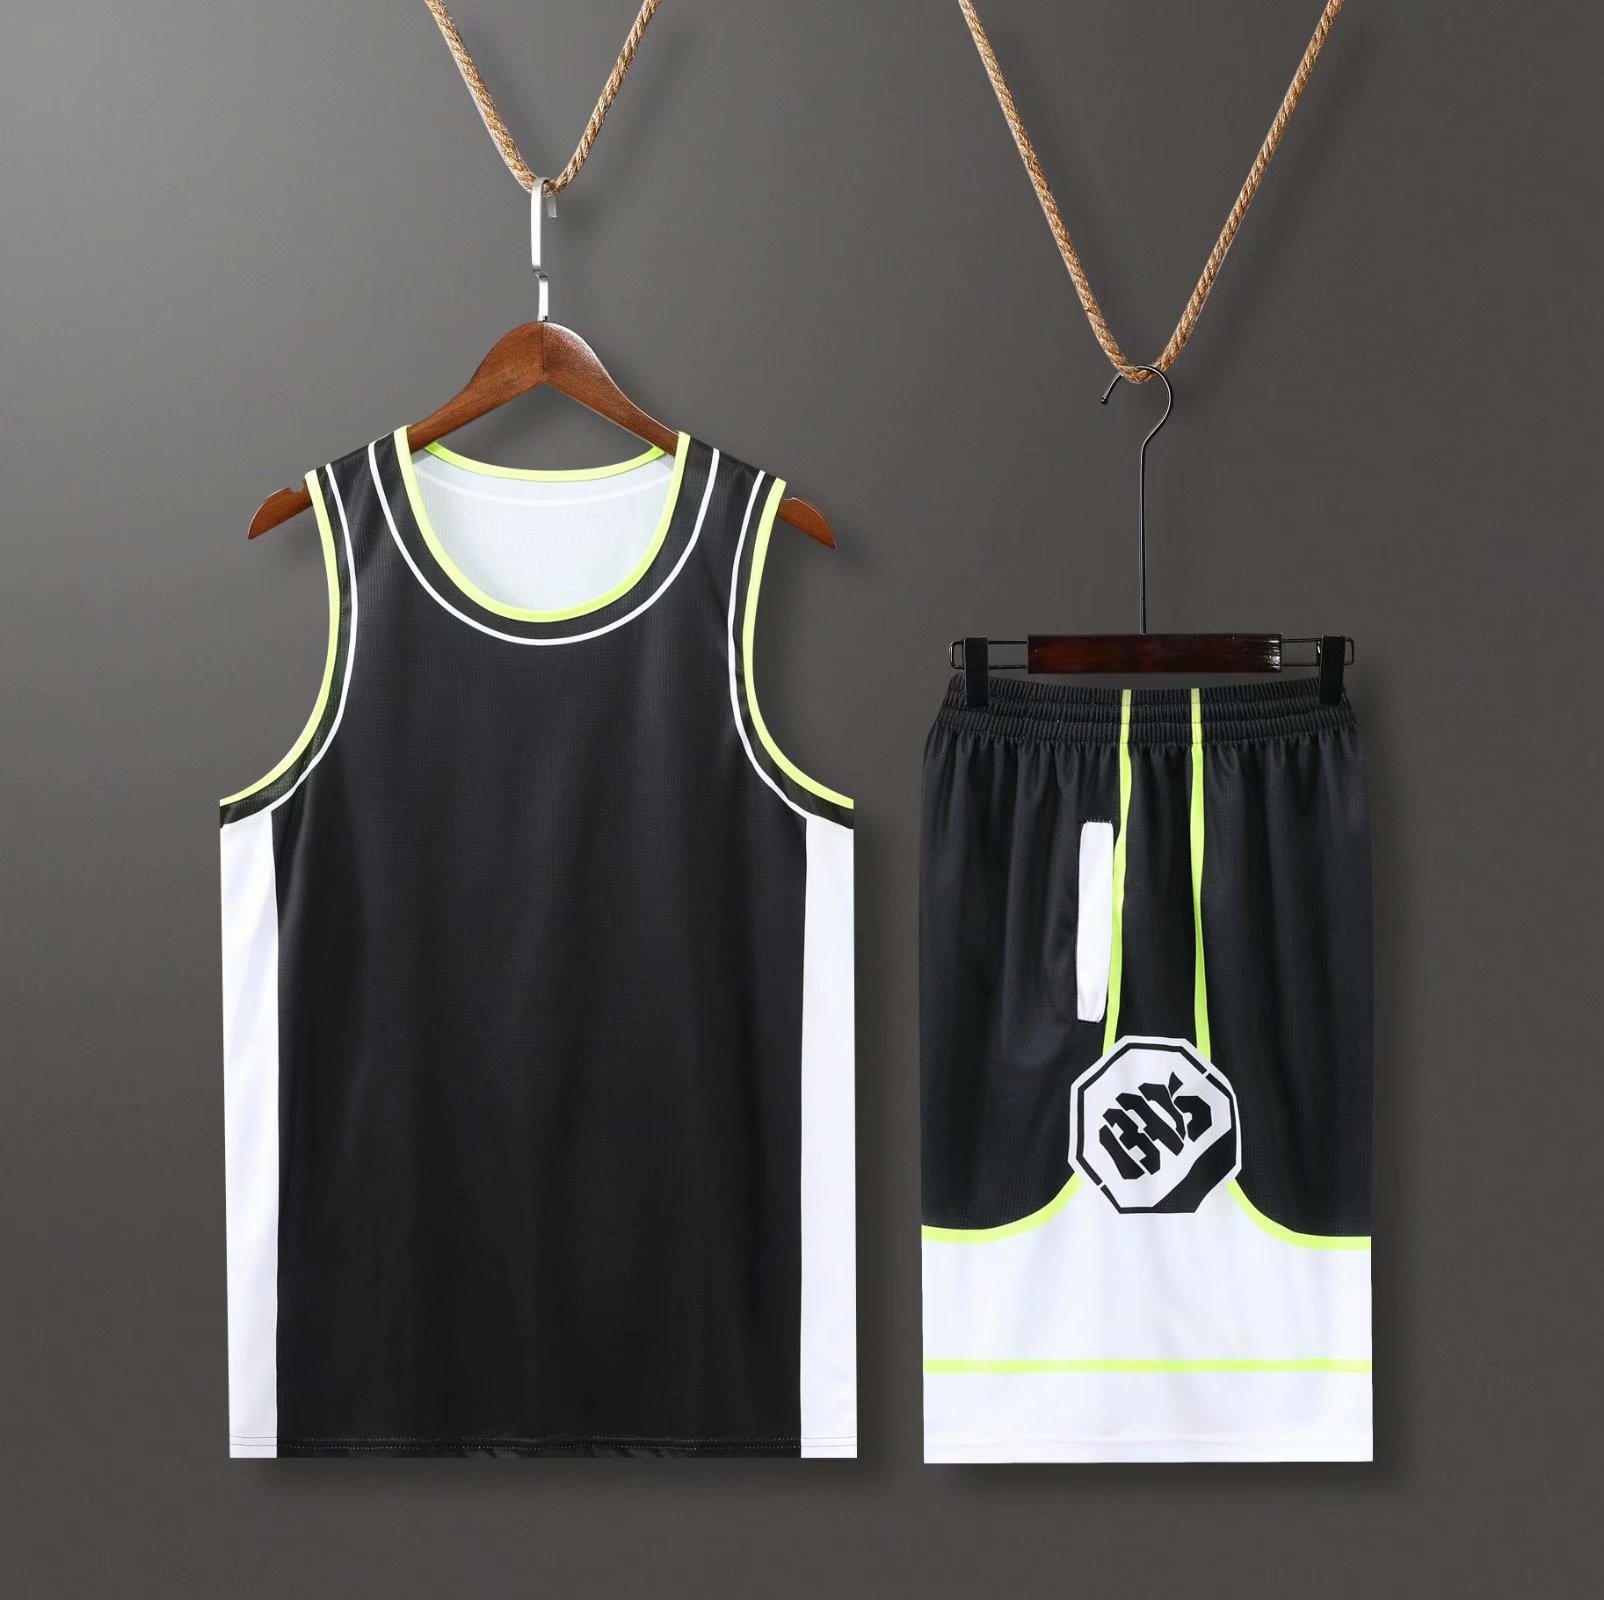 Cheap 2021 classic moisture absorption basketball men sports wear shirt jerseys basketball clothes can be customized and printed logo wholesale